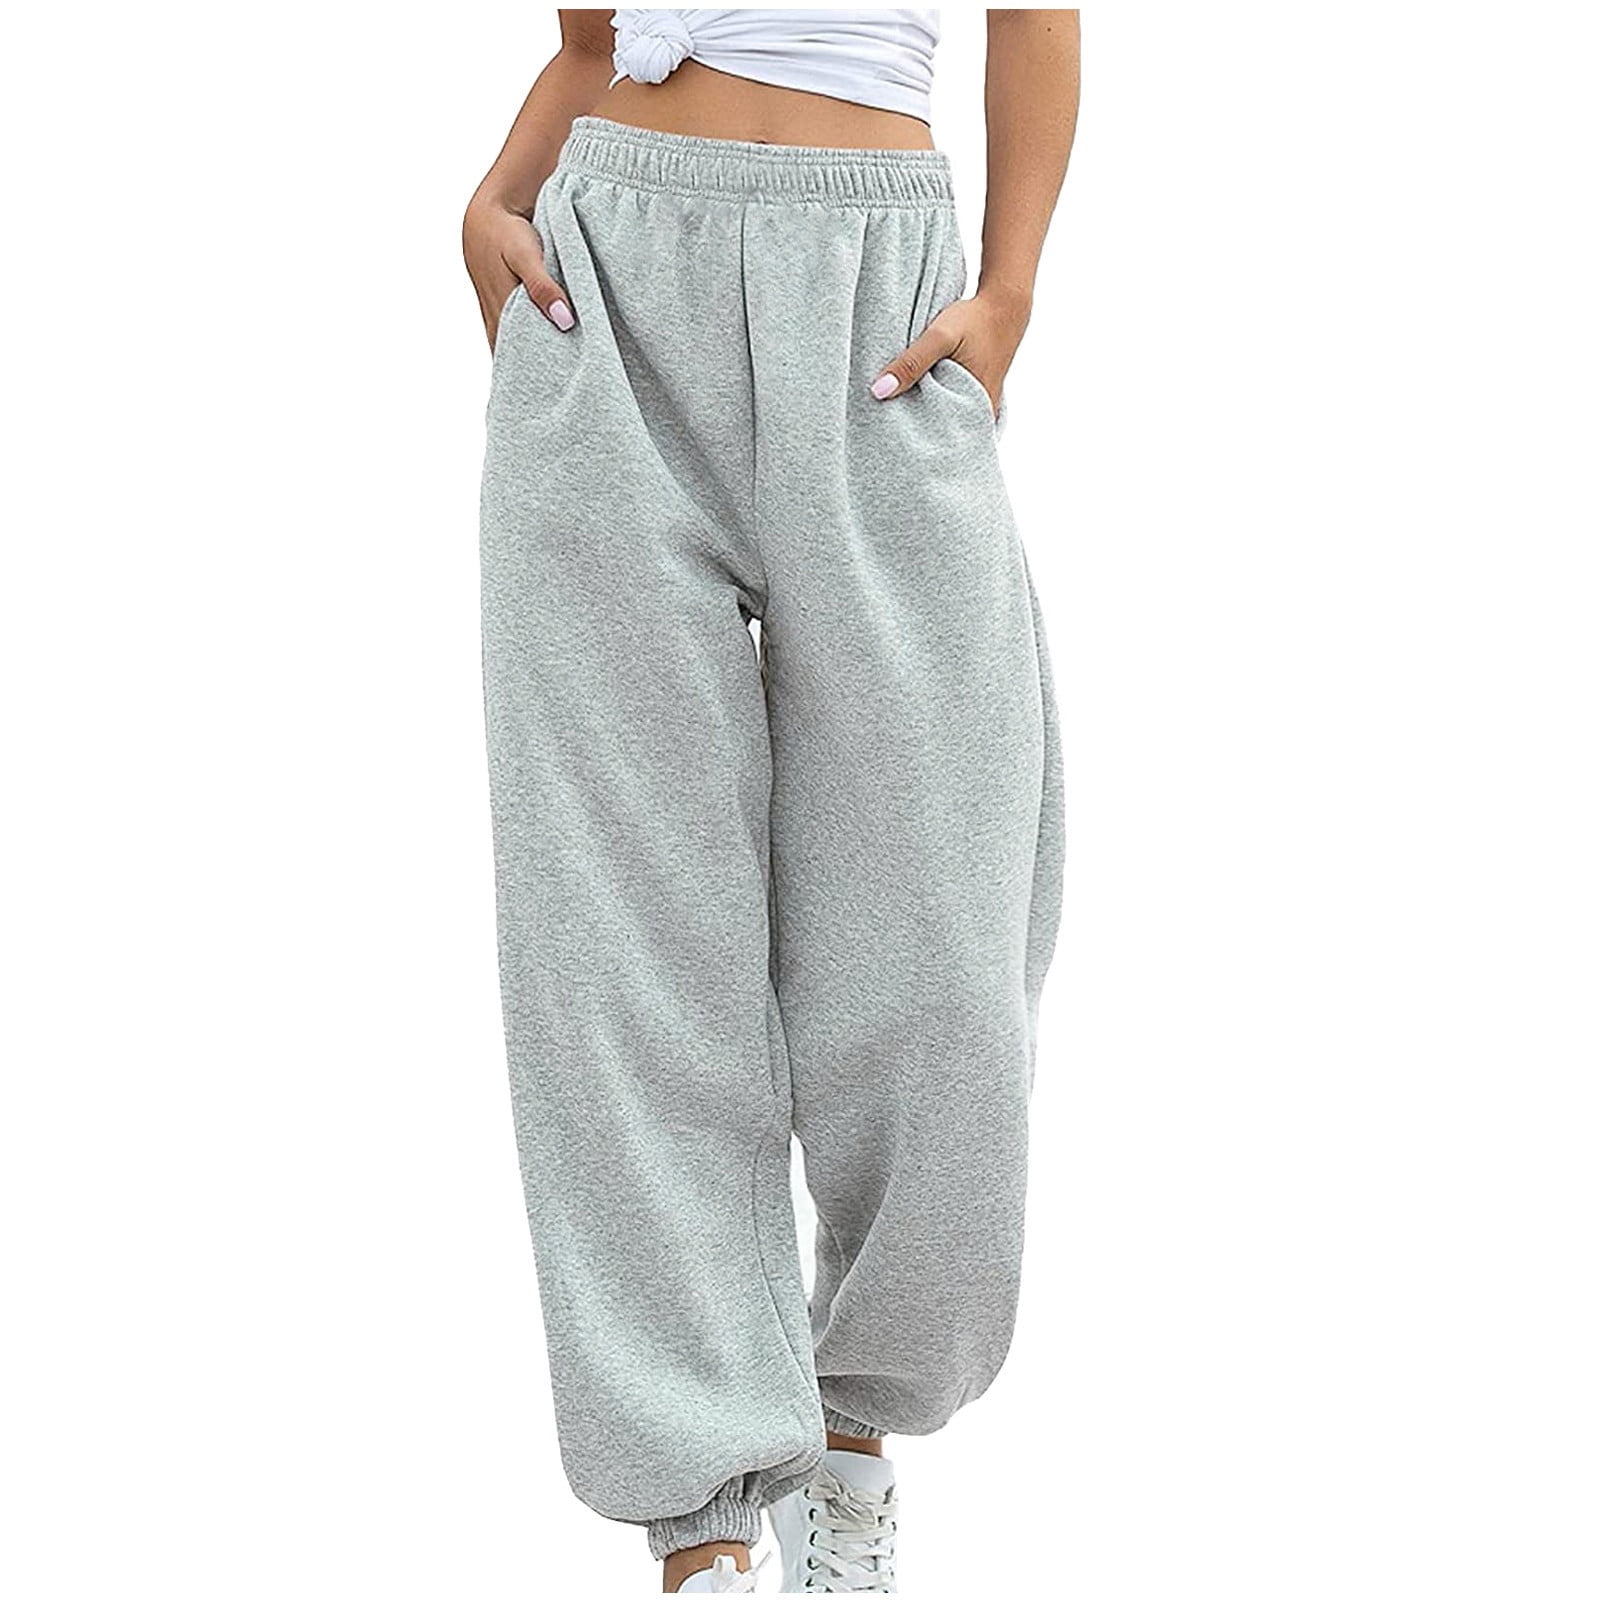 HSMQHJWE Sweatpants For Women Womens Joggers With Pockets Lounge